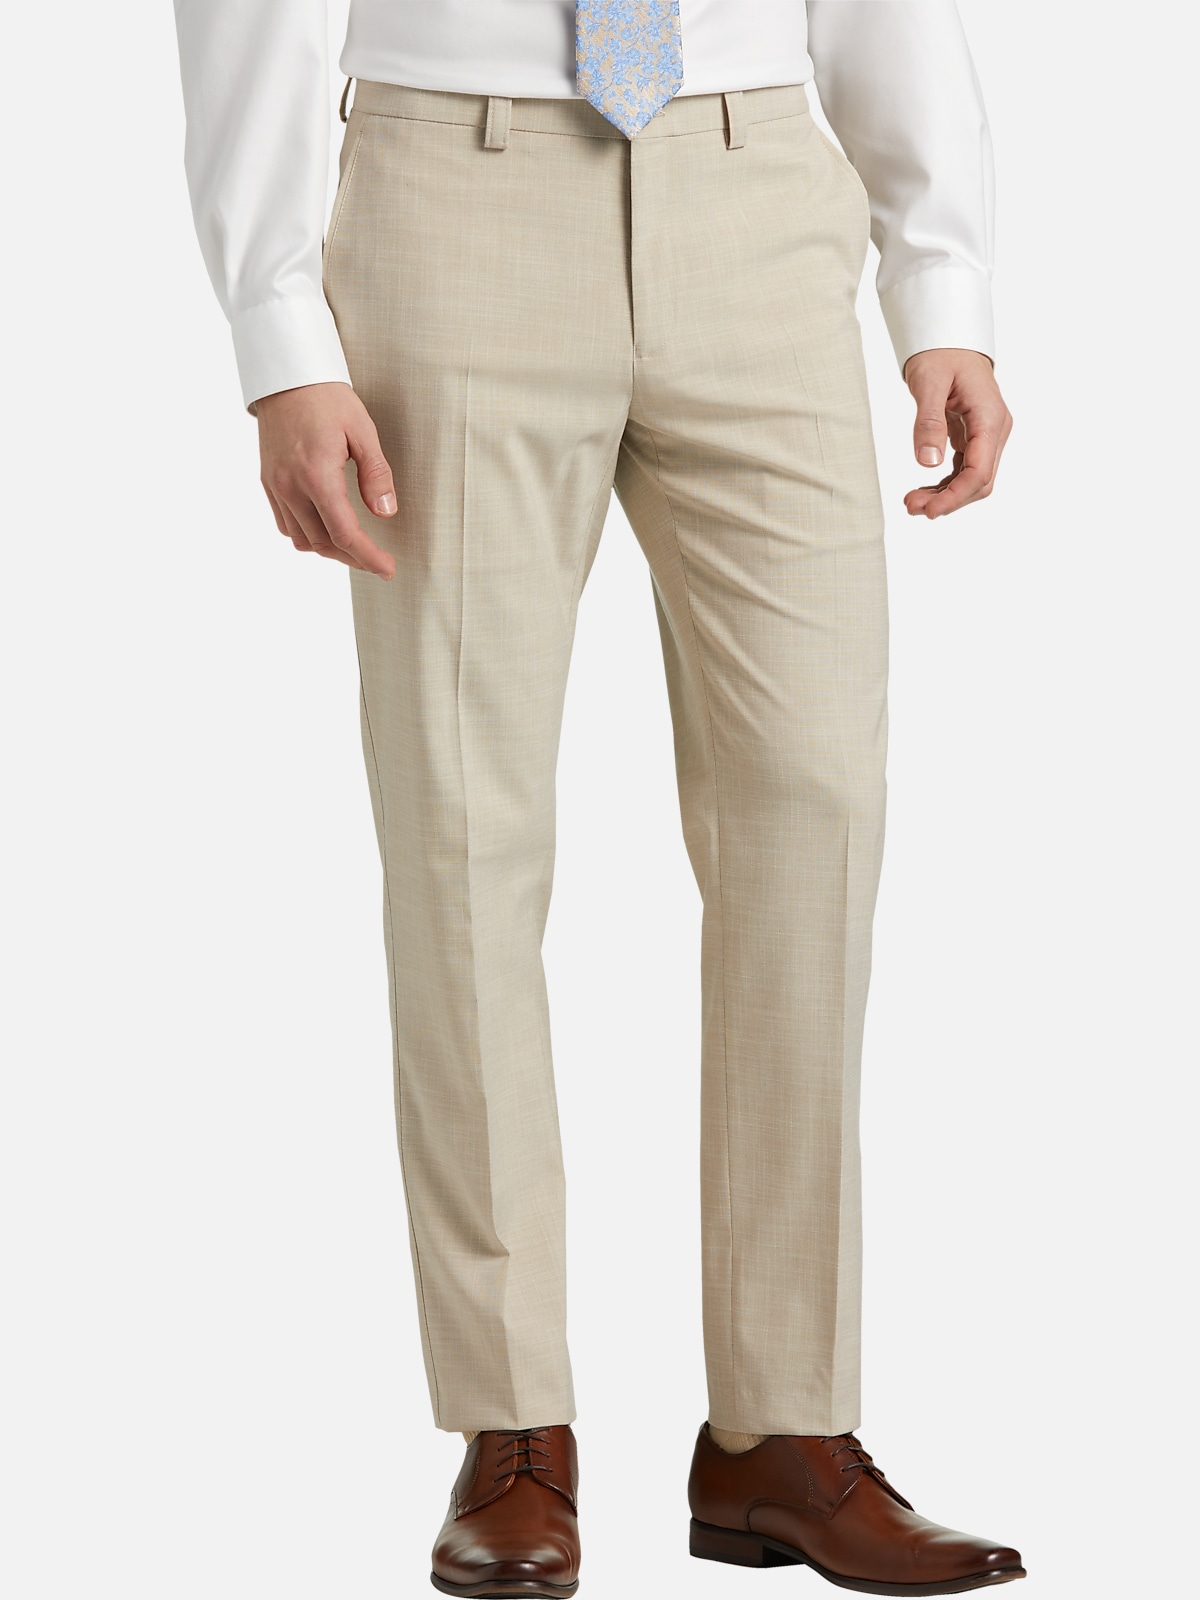 Michael Kors Modern Fit Suit Separates Pants | All Clearance $39.99 ...